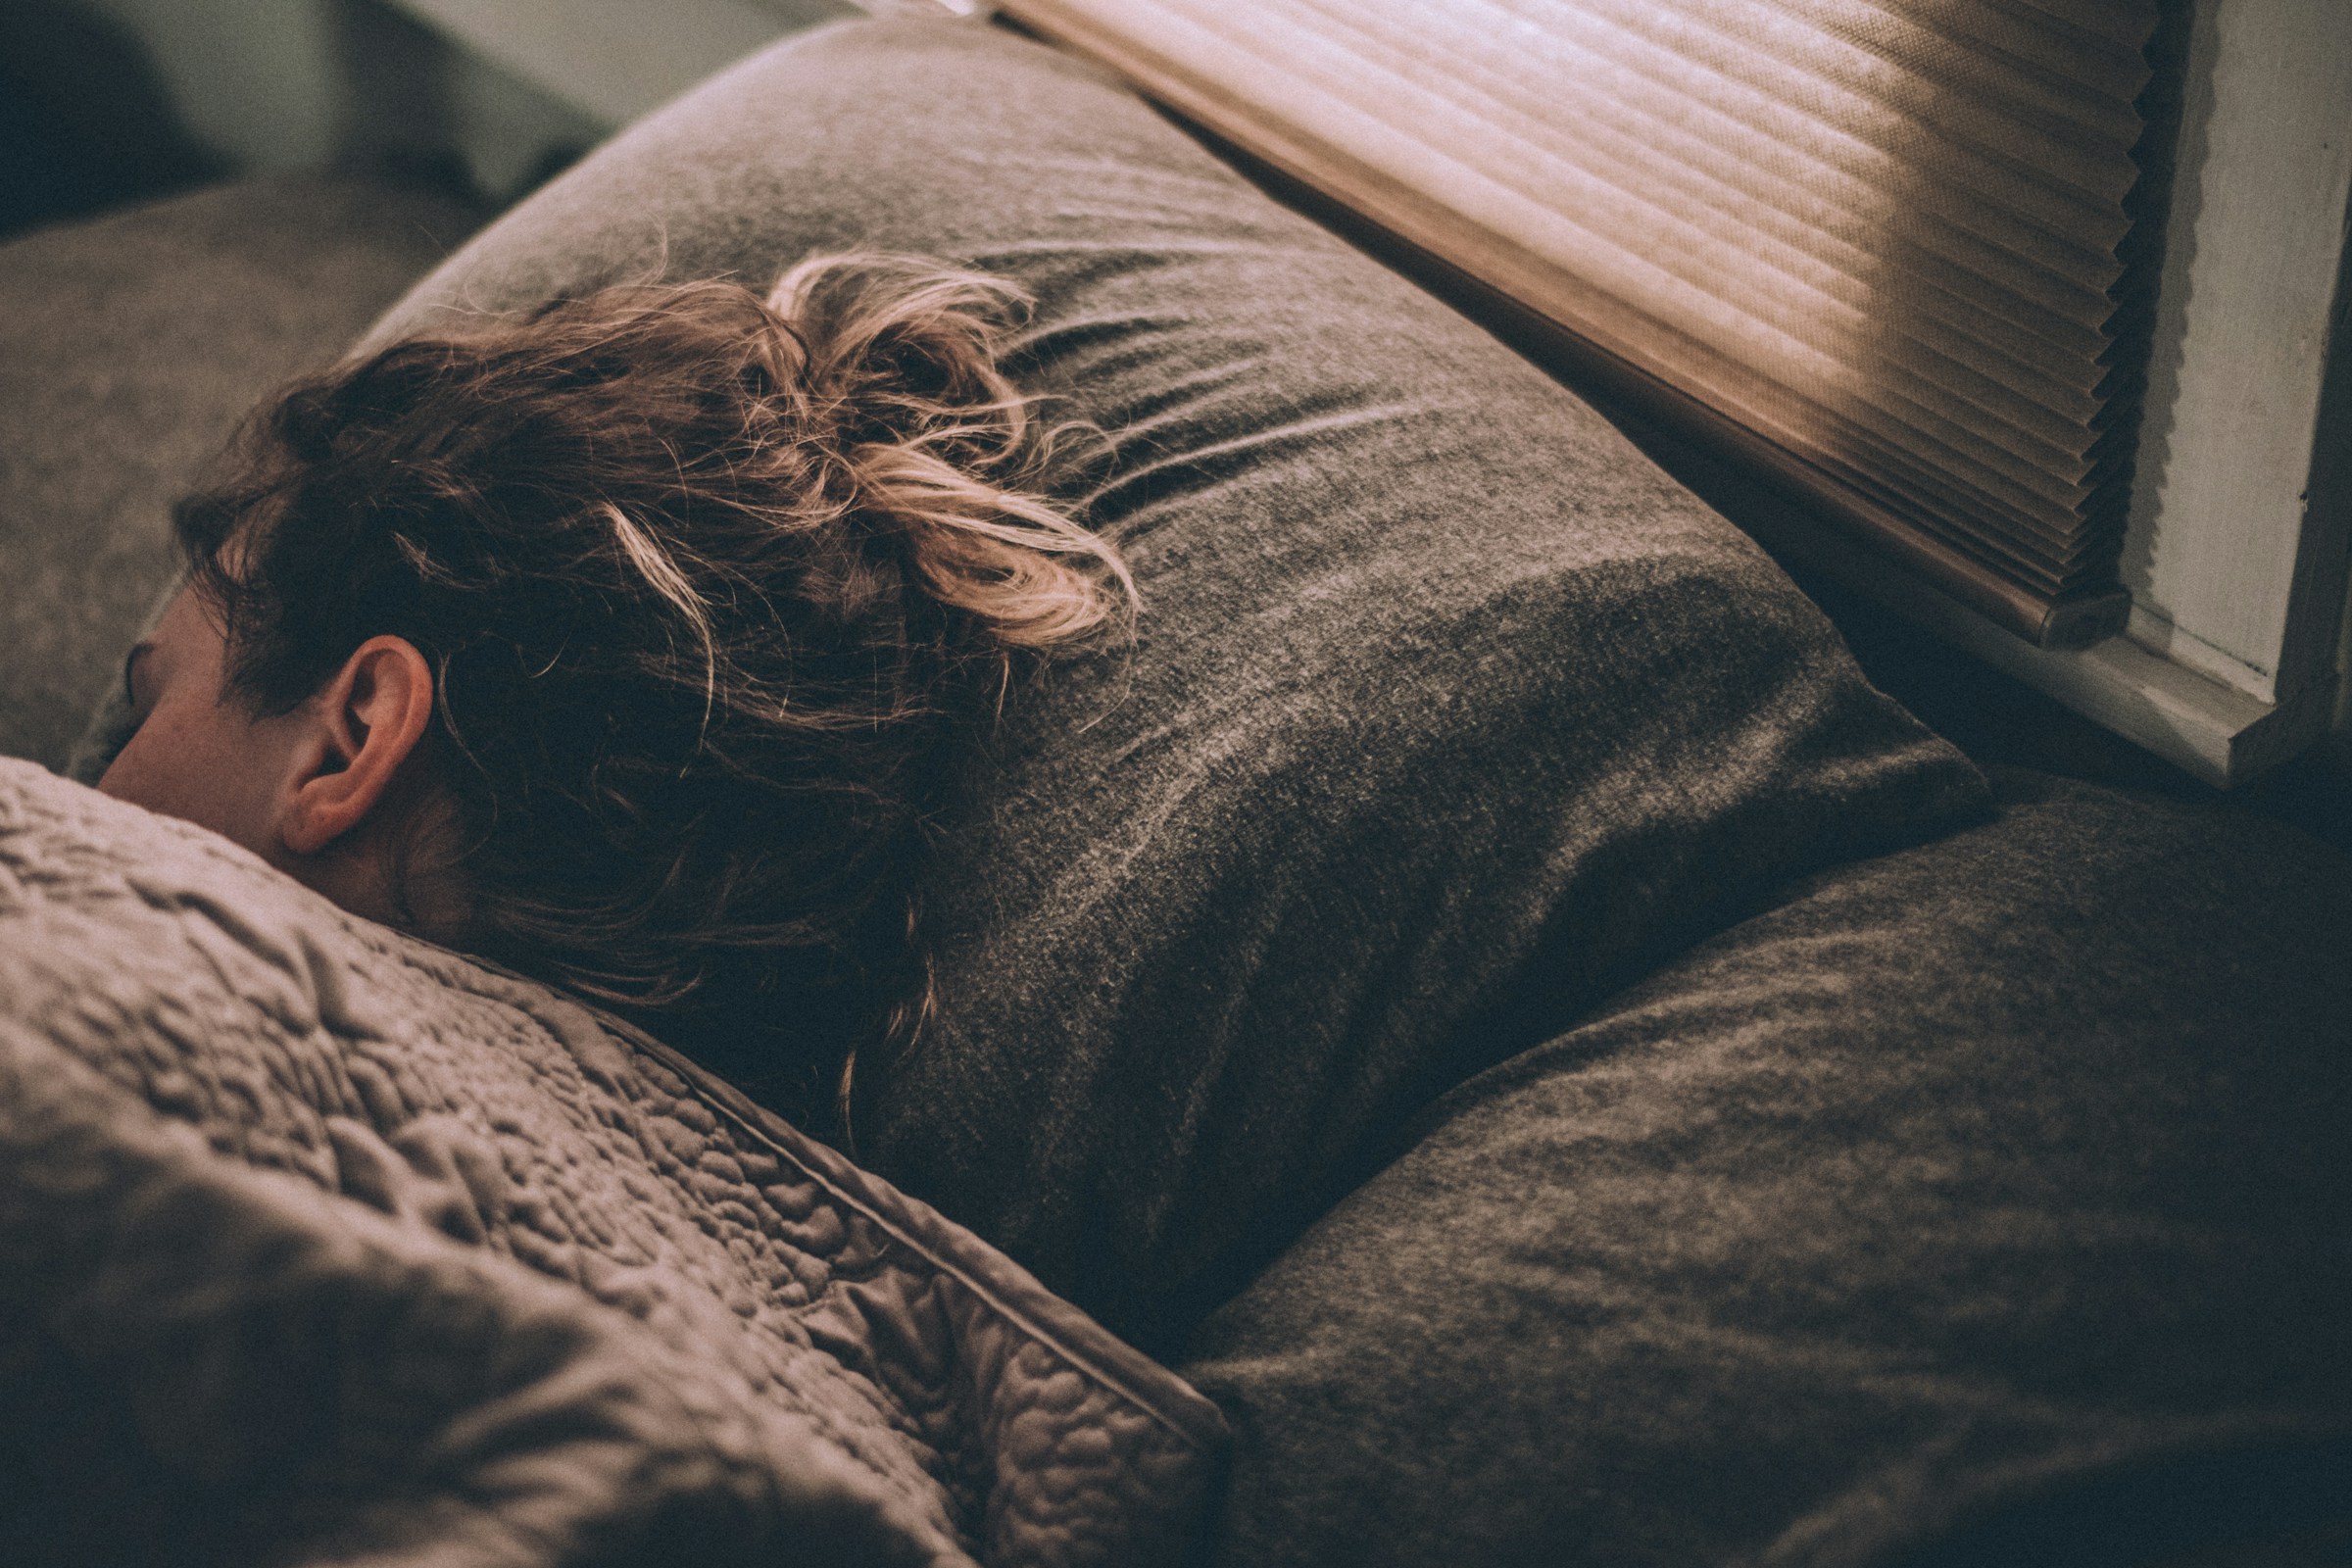 A girl in bed | Source: Unsplash